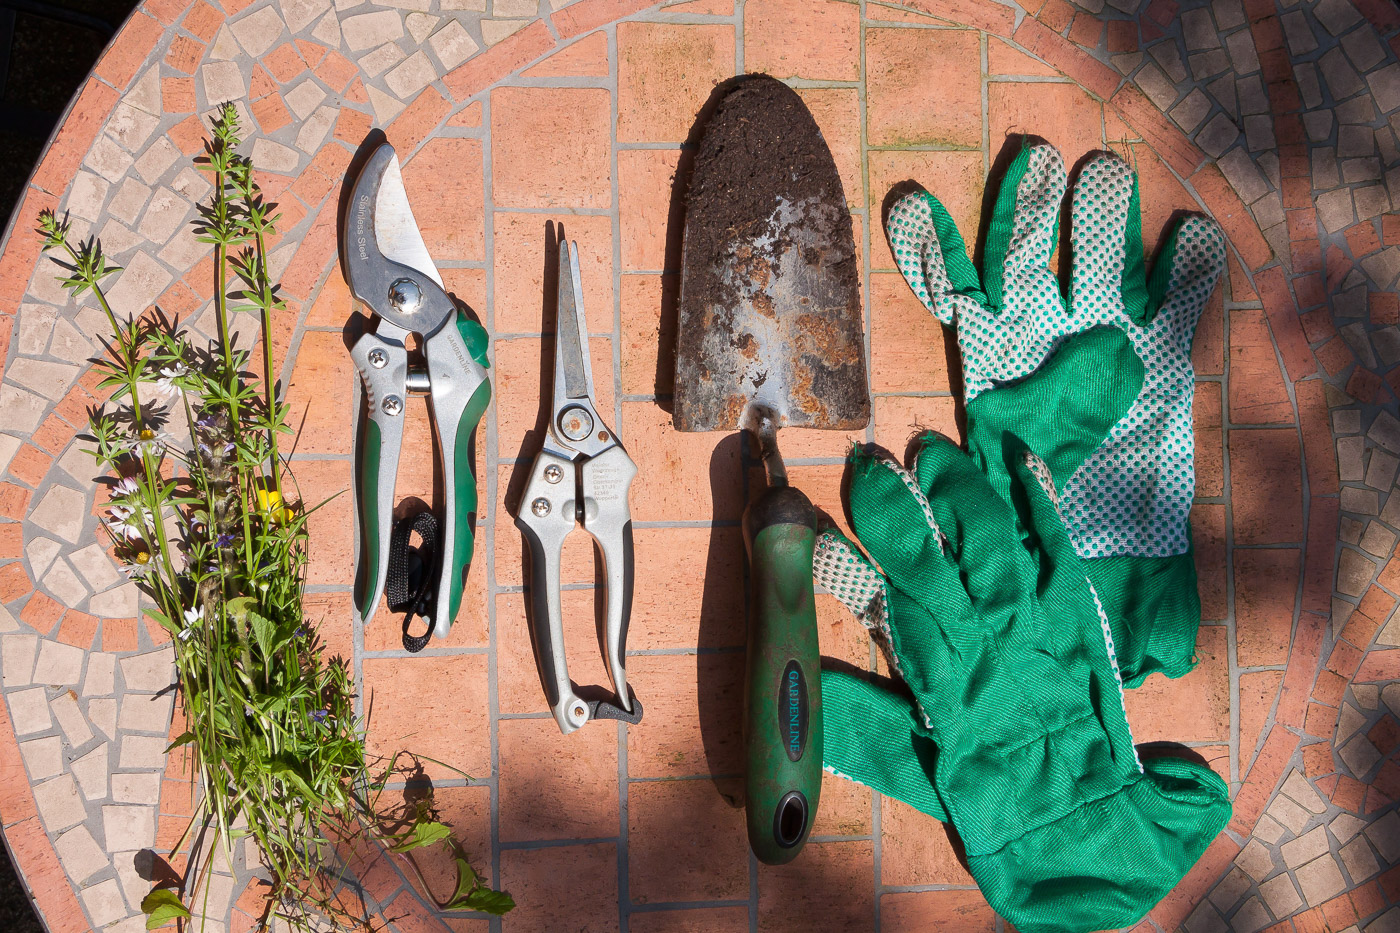 Gardening tools laid out on a table.